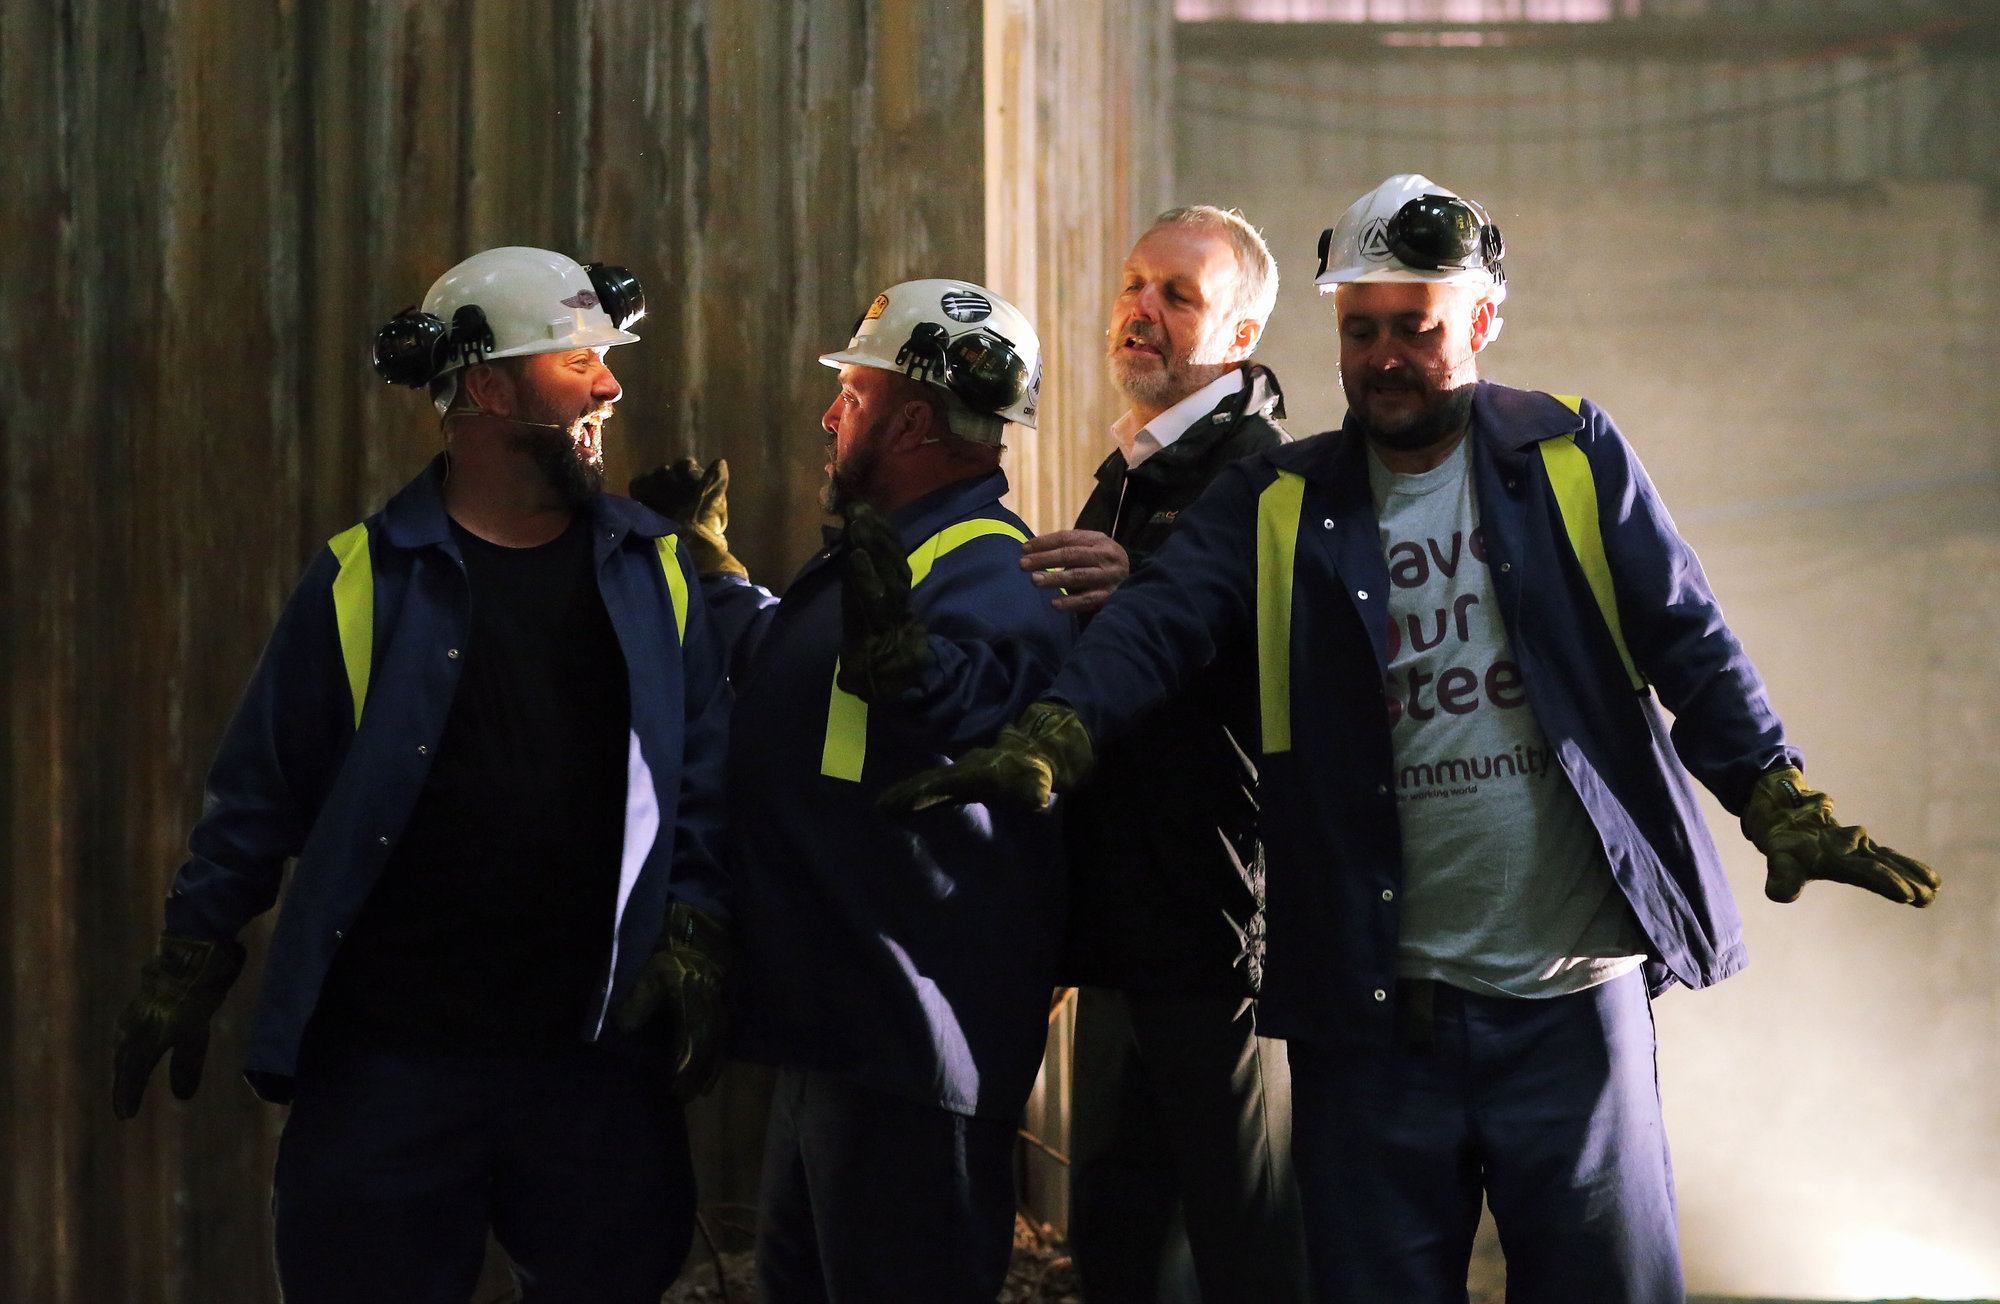 Pictured: The four main characters perform a dance scene Re: Press rehearsal of "We'Re Still Here", a play created by Rachel Trezise, Common Wealth and the National Theatre Wales about steelworkers, which will be performed in Byass Works, a disused industrial unit, in Port Talbot, south Wales, UK.